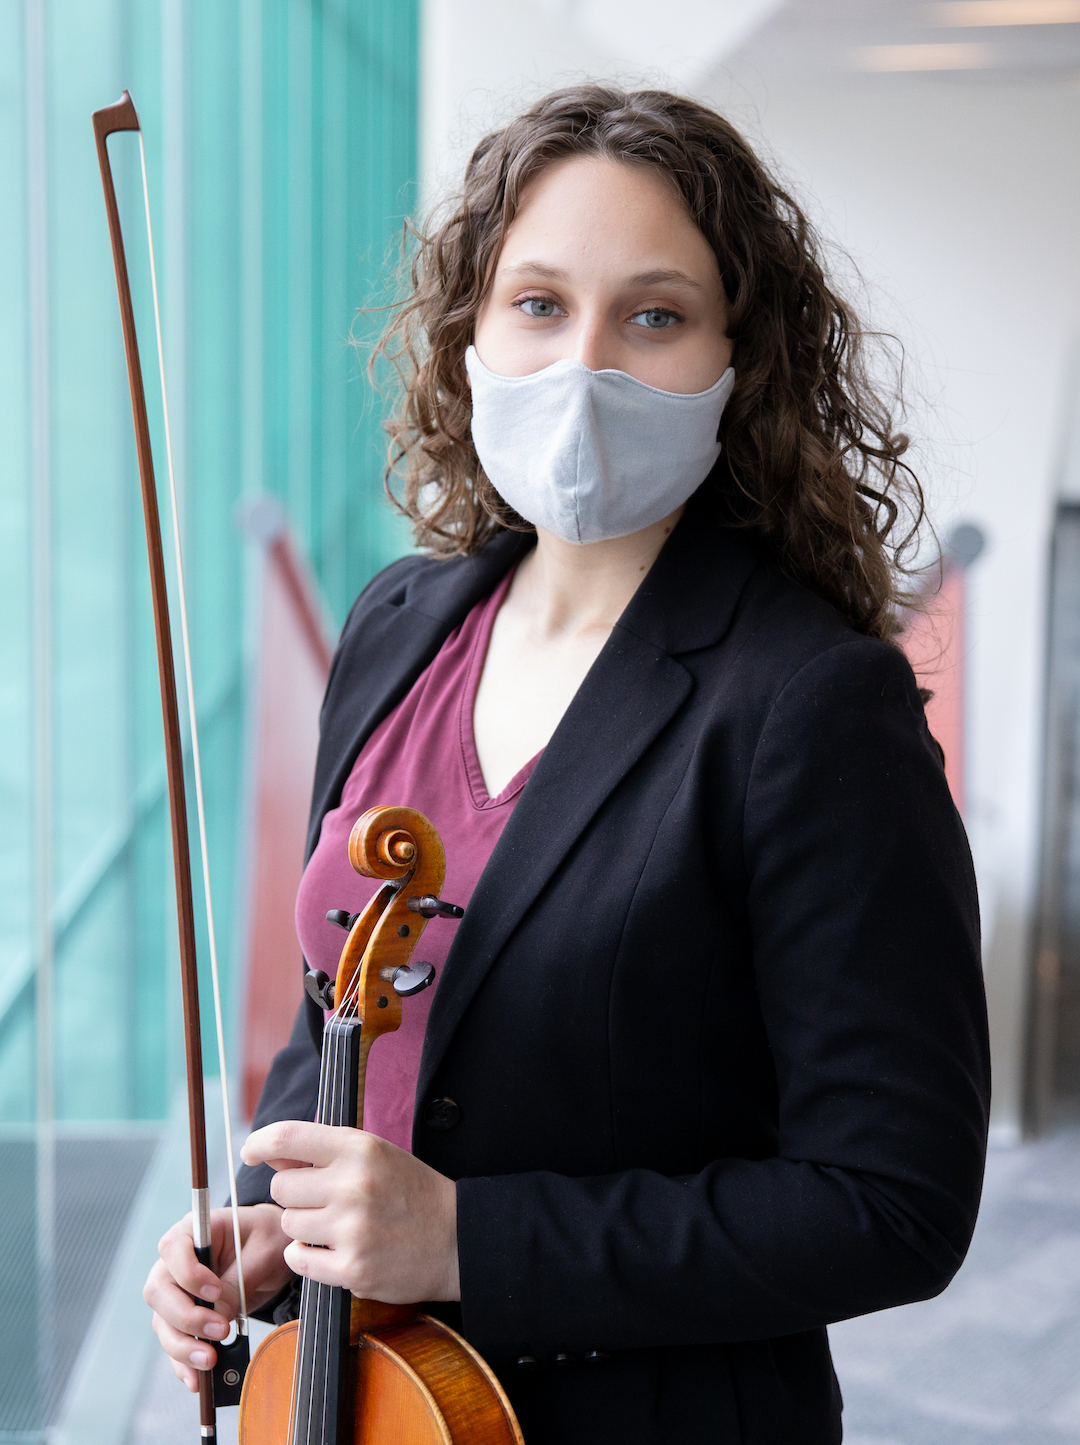 Noémie Chemali holding her viola. She is wearing a face covering.